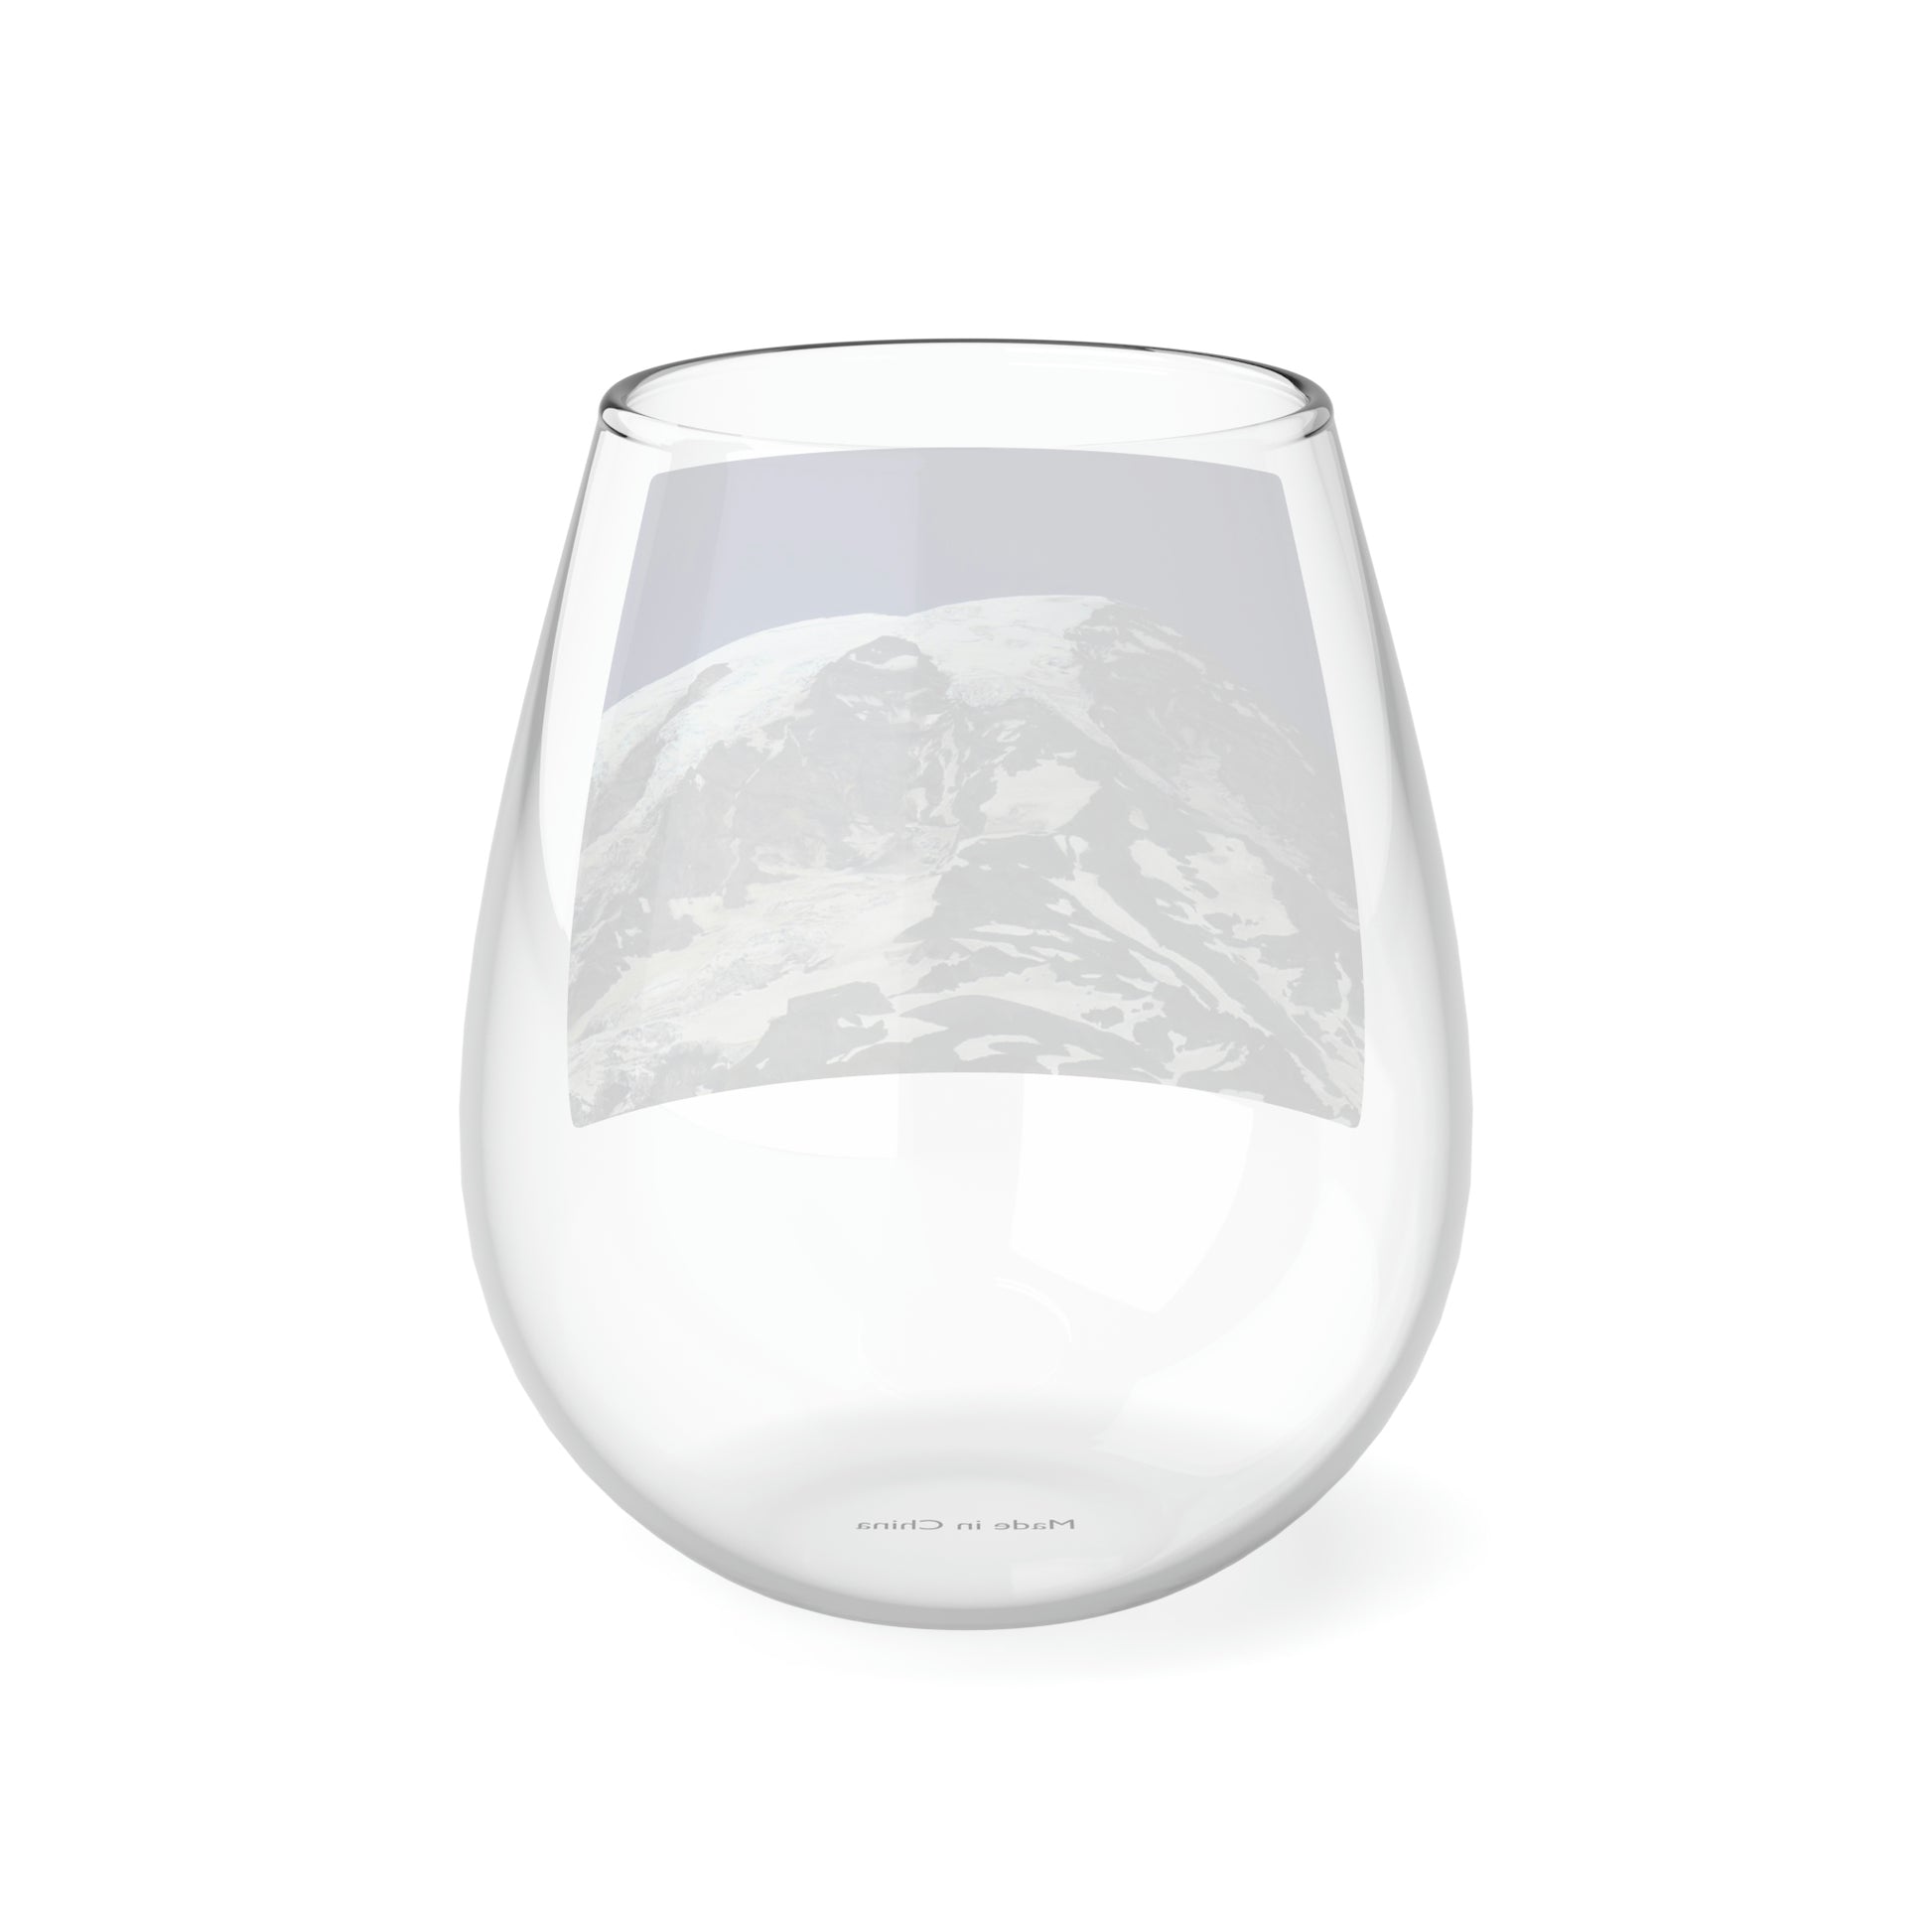 Awesome Columbia Crest - Stemless Wine Glass, 11.75 oz - Fry1Productions